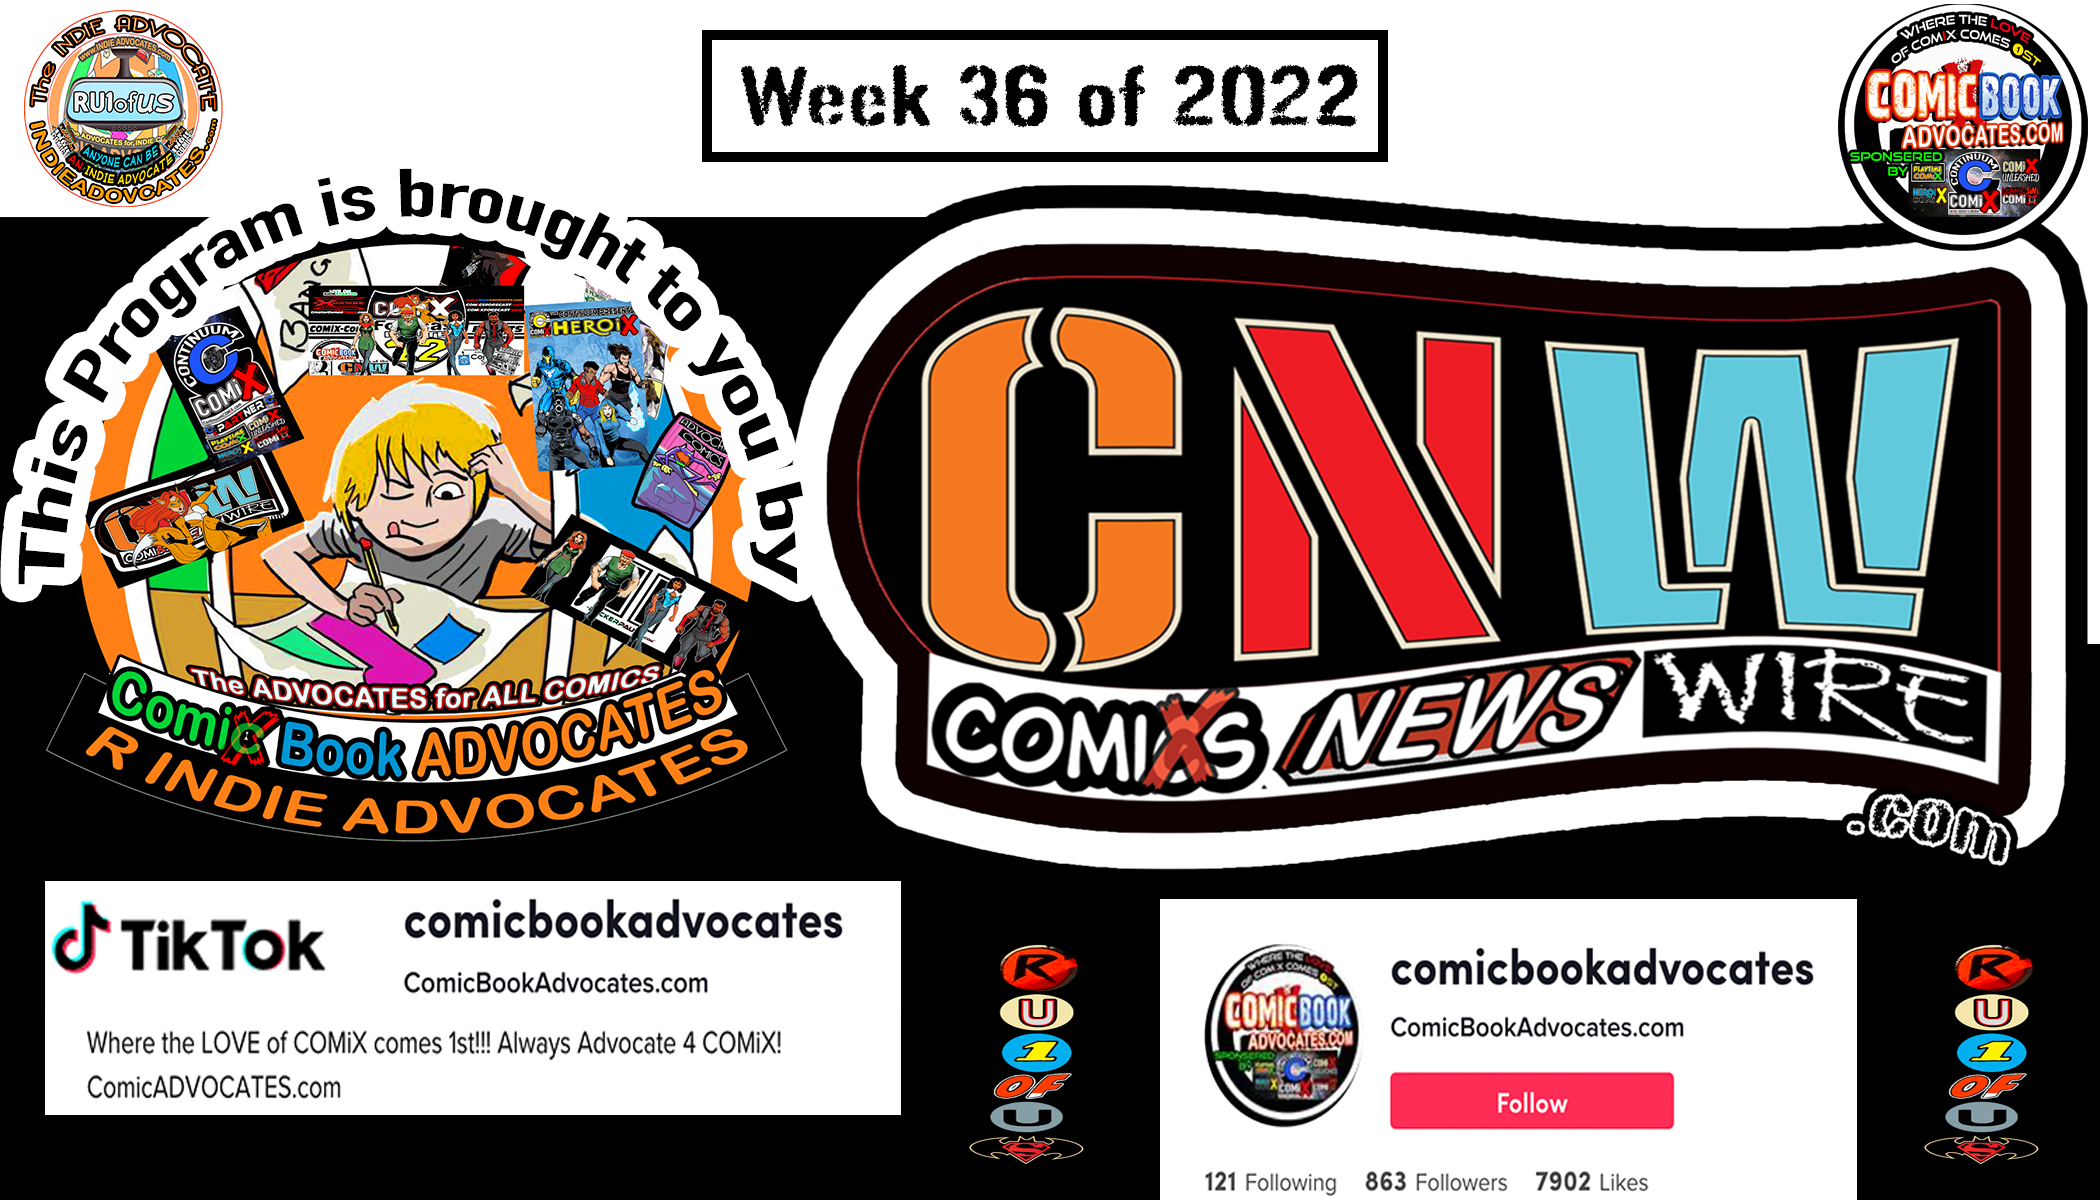 -THE COMiX NEWS WiRE on Tik Tok: Week 36: 9/05-12/22 FALL PREVIEW